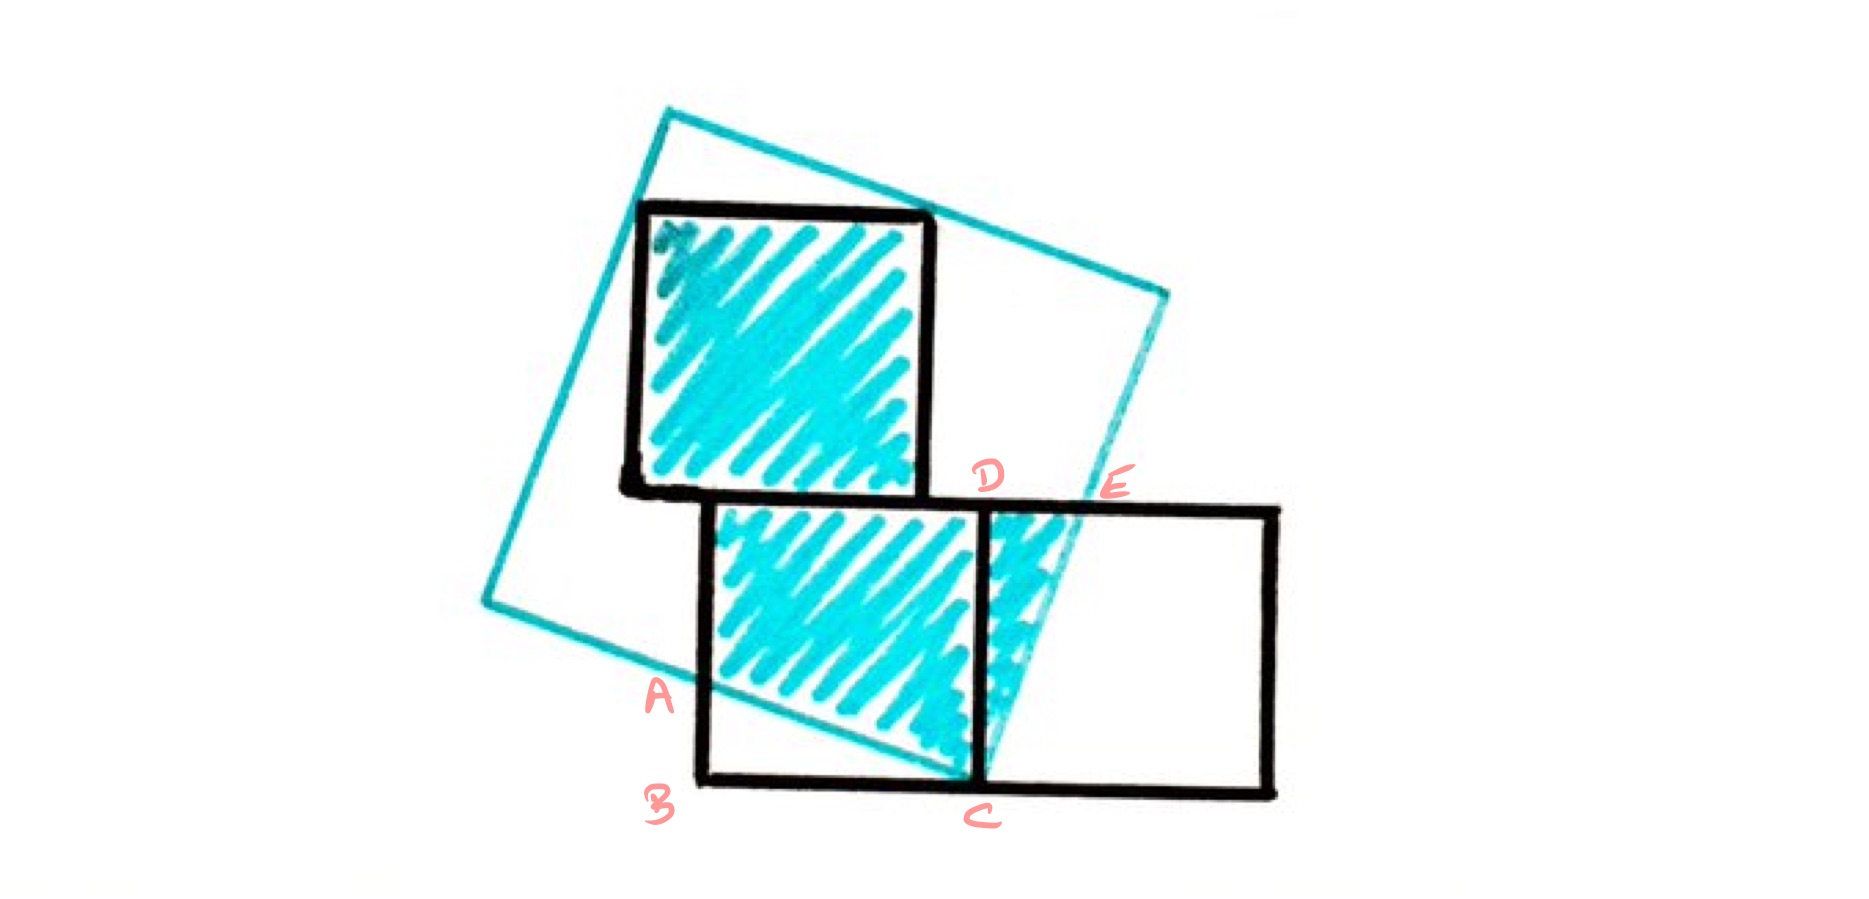 Three stacked squares and a fourth square labelled